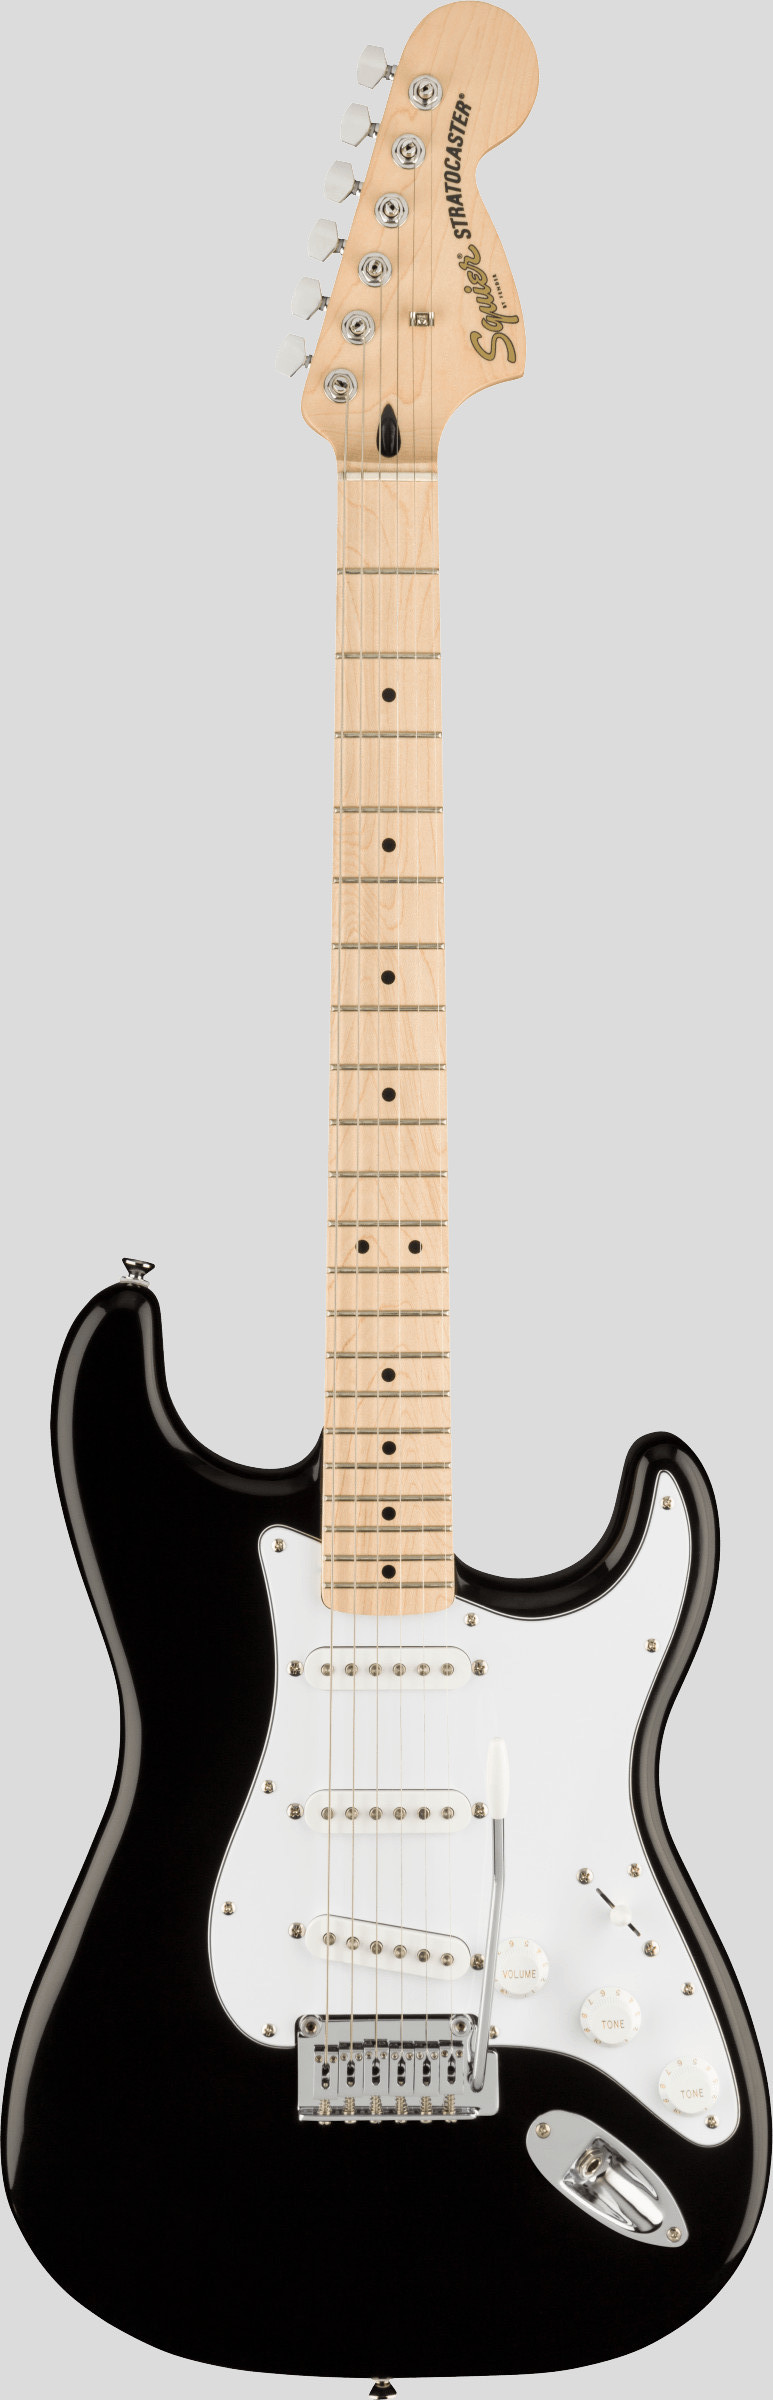 Squier by Fender Affinity Stratocaster Black 1